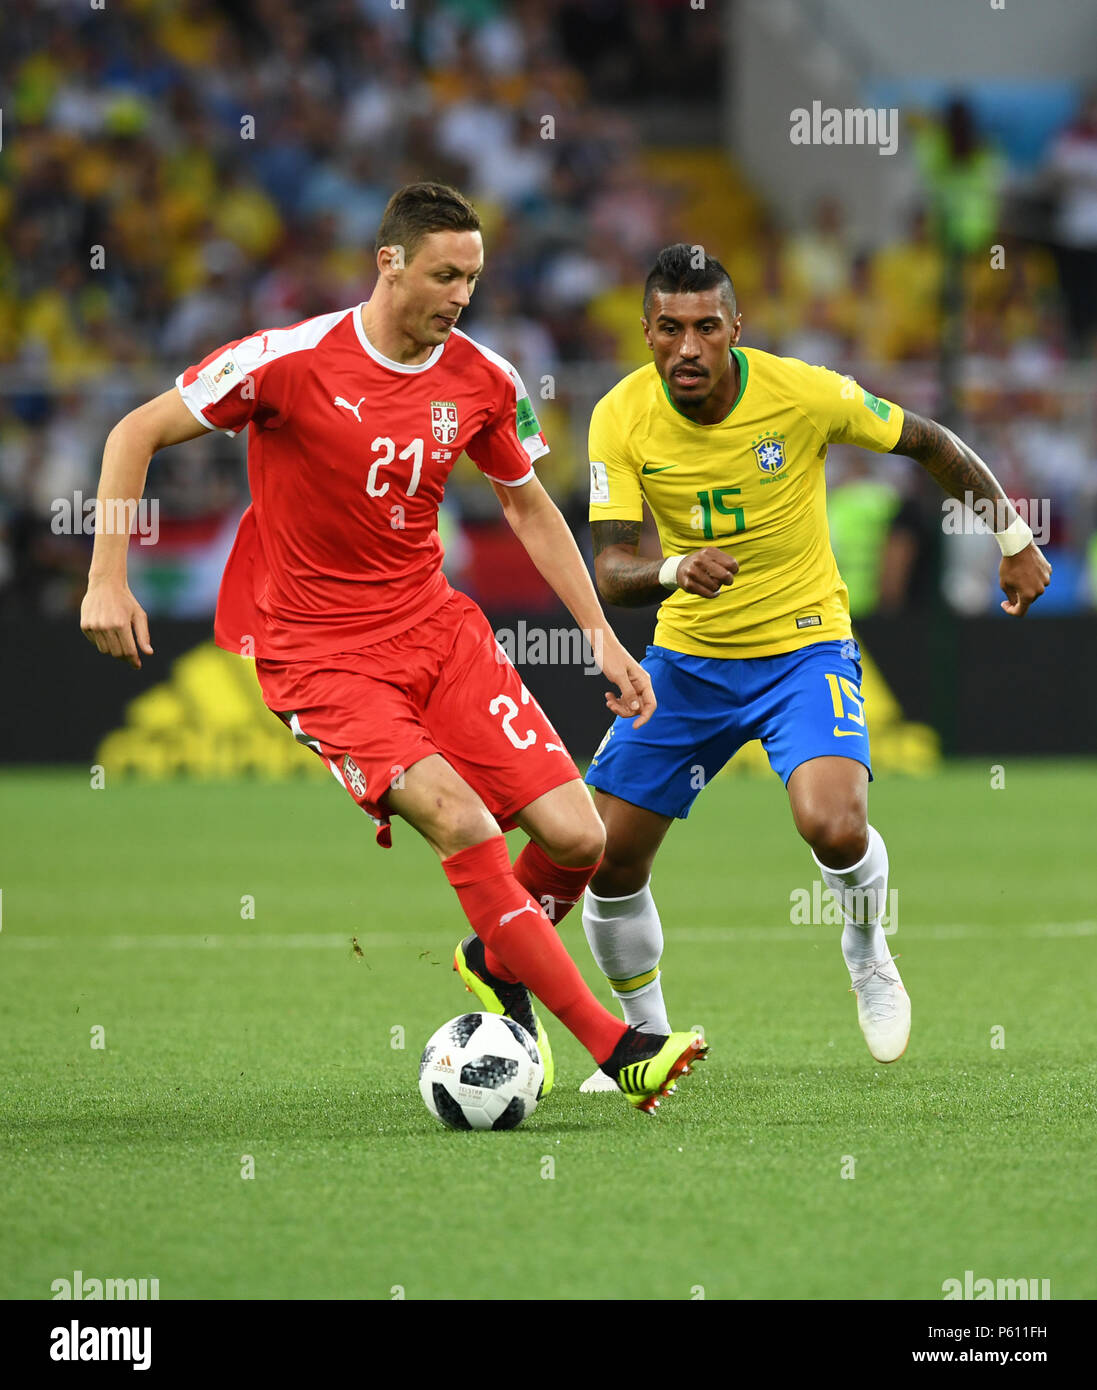 Moscow, Russia. 27th June, 2018. Paulinho (R) of Brazil vies with Nemanja Matic of Serbia during the 2018 FIFA World Cup Group E match between Brazil and Serbia in Moscow, Russia, June 27, 2018. Credit: Du Yu/Xinhua/Alamy Live News Stock Photo